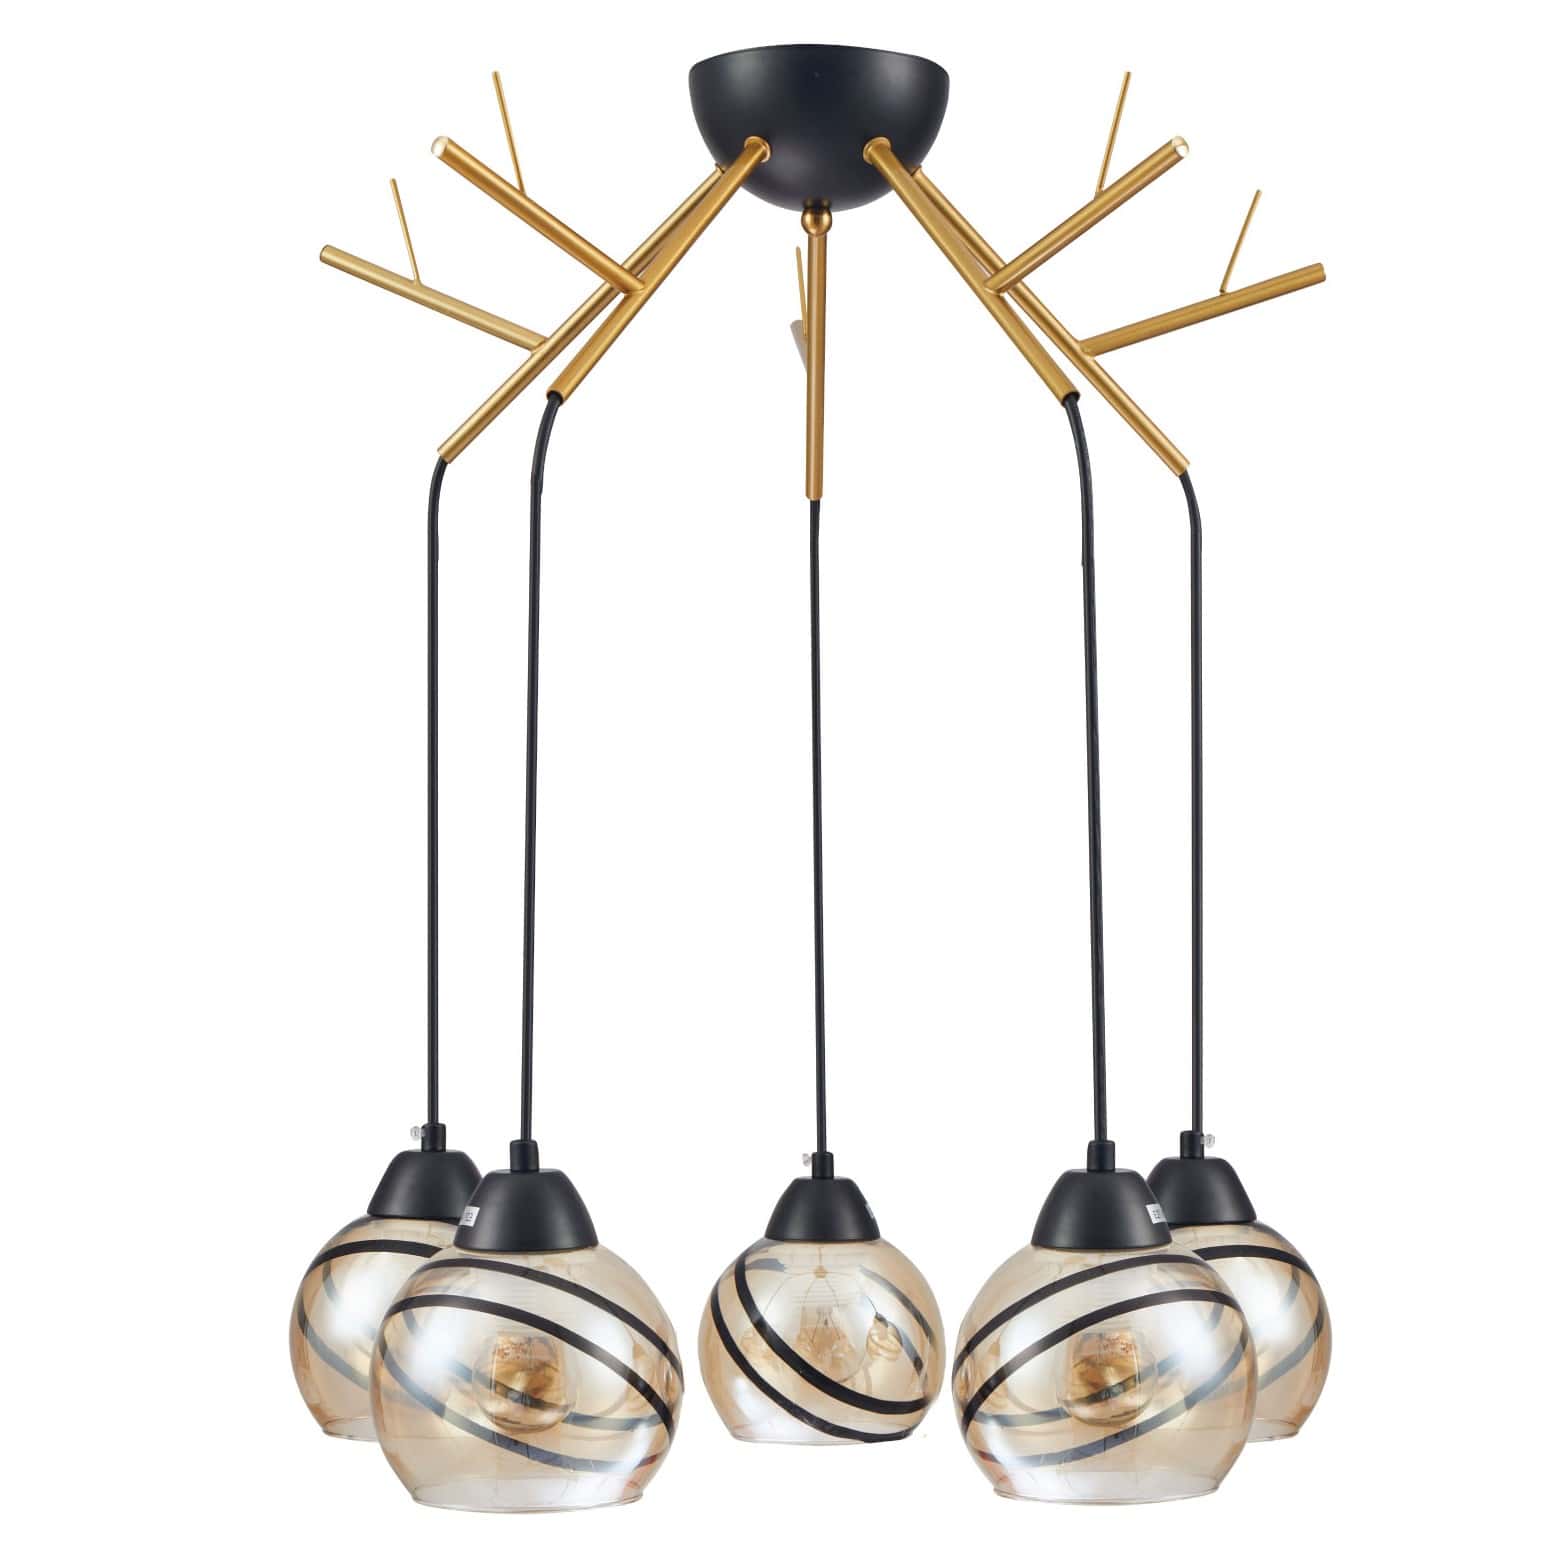 Main image of Amber Dome Glass Gold Twig Modern Ceiling Light 159-17596 | TEKLED 159-17596